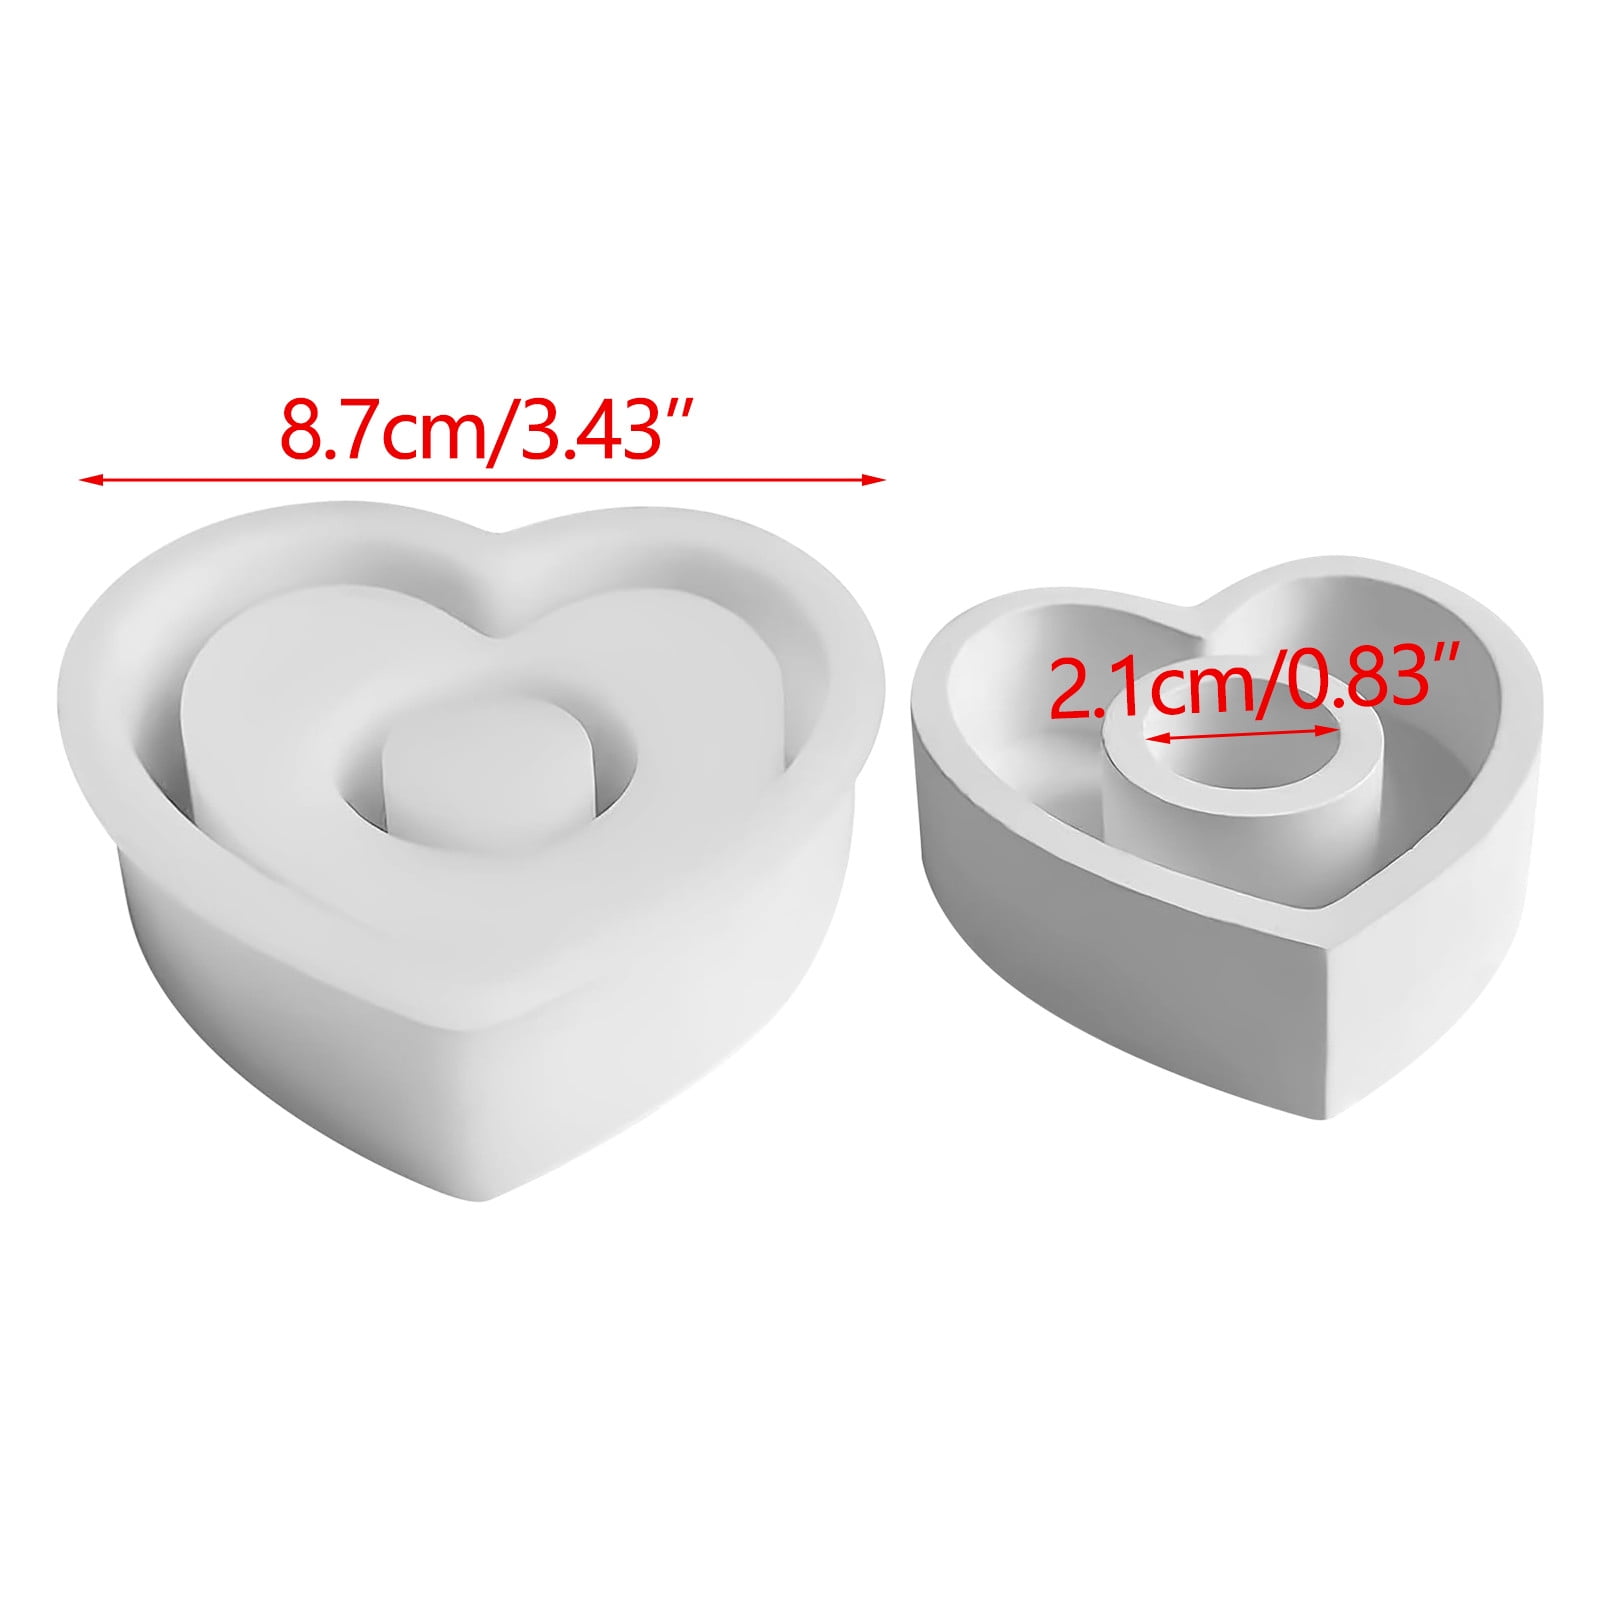 Vikakiooze Promotion on Sale! Silicone Molds DIY Candle Making Mold 3D  Silicone Mold Soy Wax Candle Mold